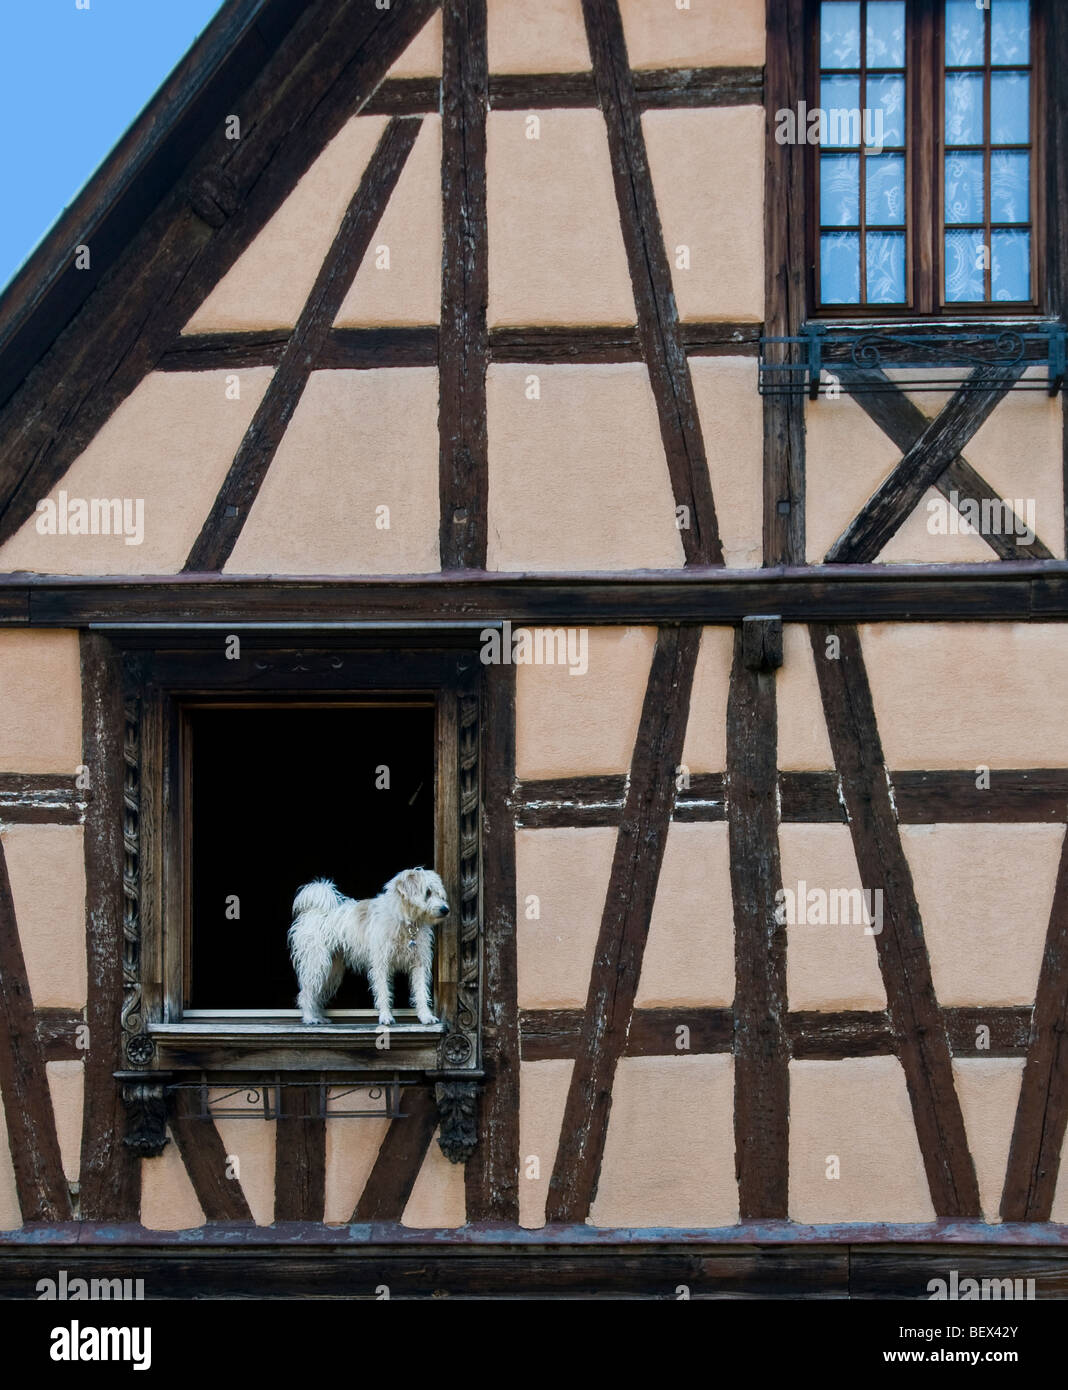 Faithful domestic pet white dog standing on window ledge waiting for his owner to return home Alsace France Stock Photo